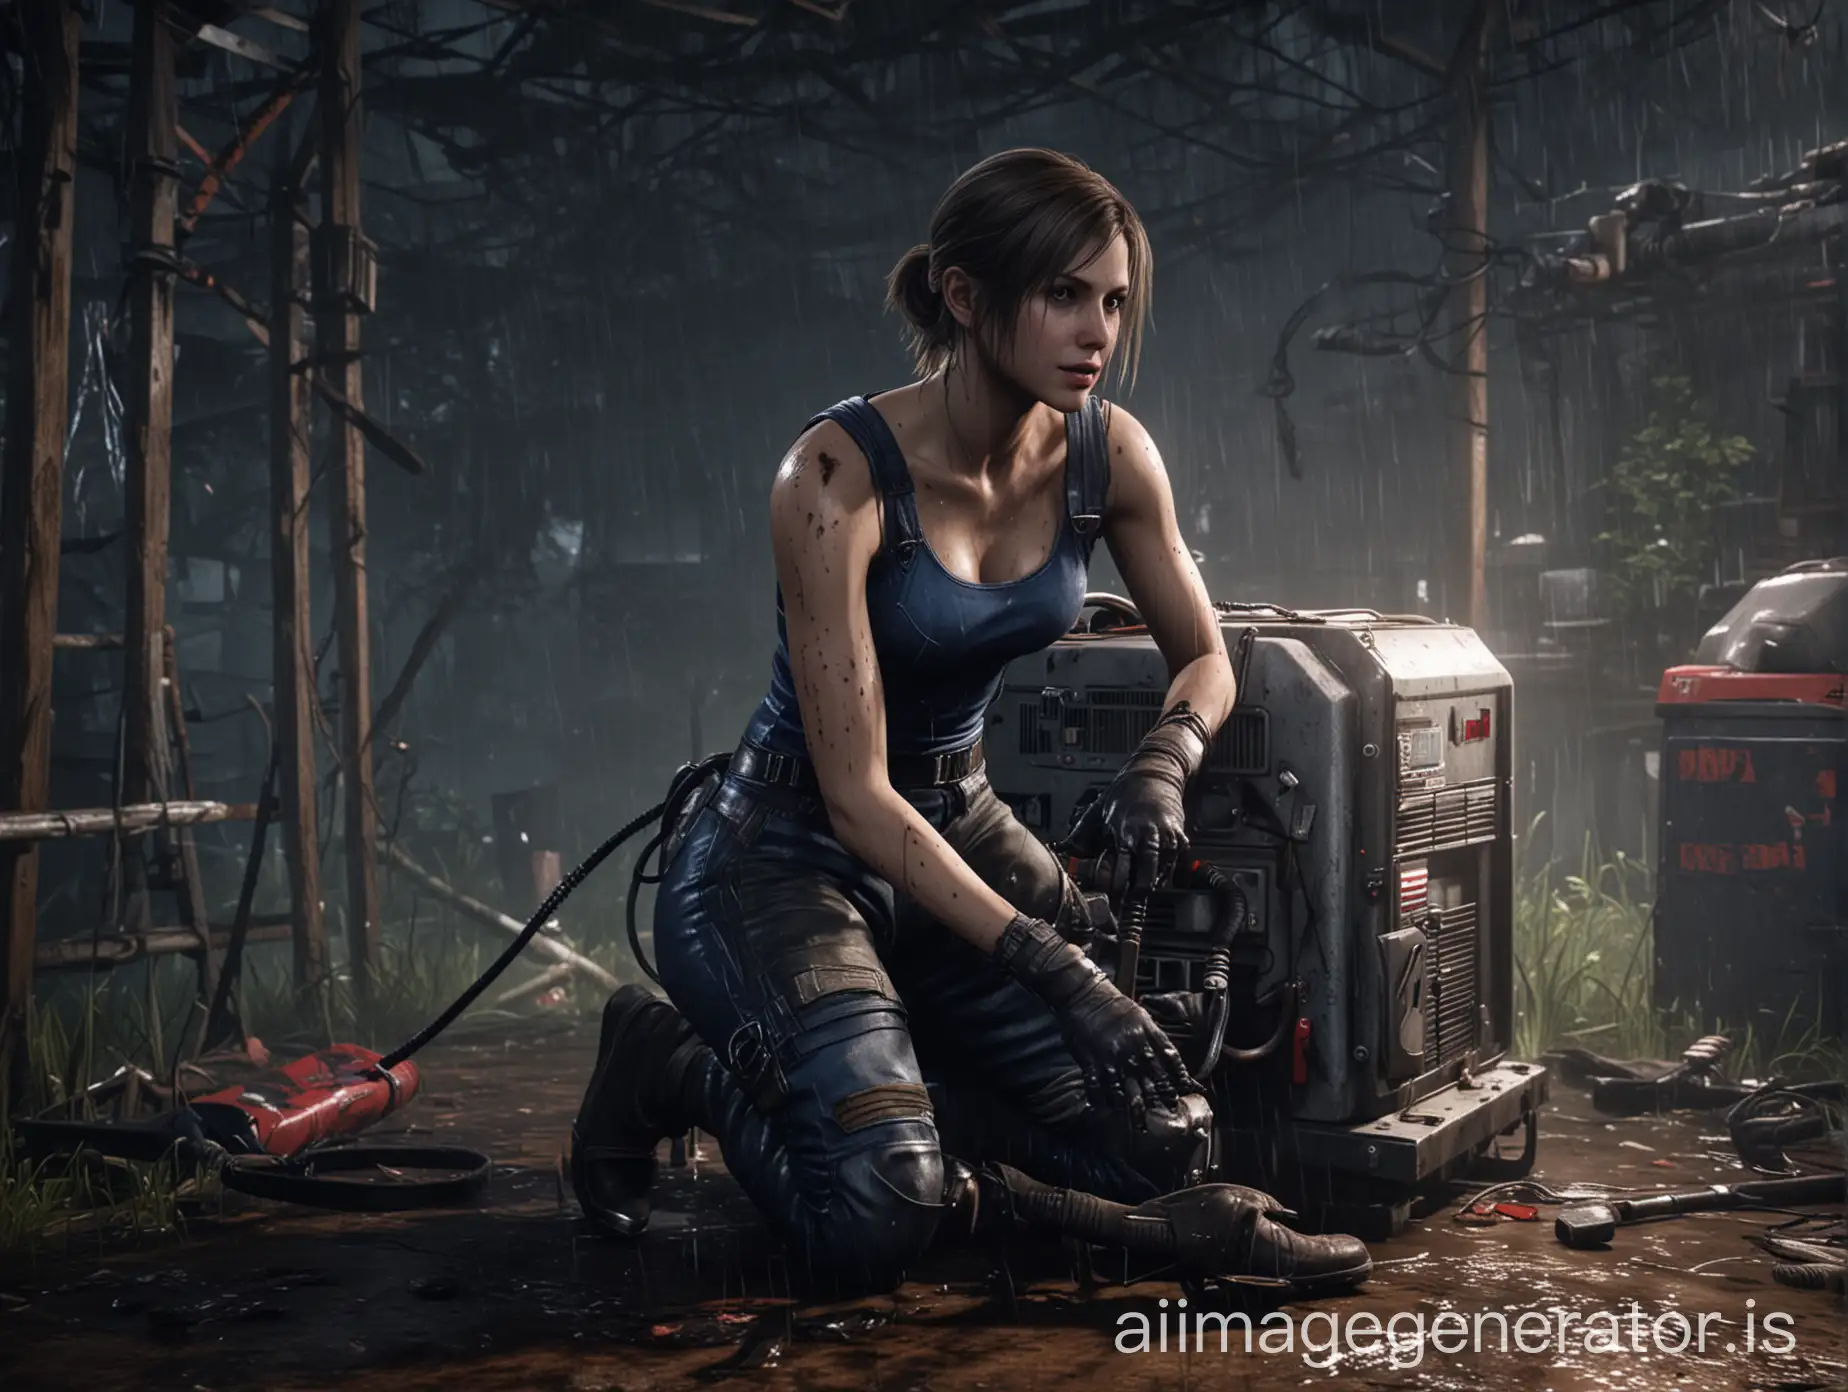 Jill Valentine repairing a generator in Dead by Daylight, Coldwind Farm, wearing her Resident Evil 3 outfit, rain